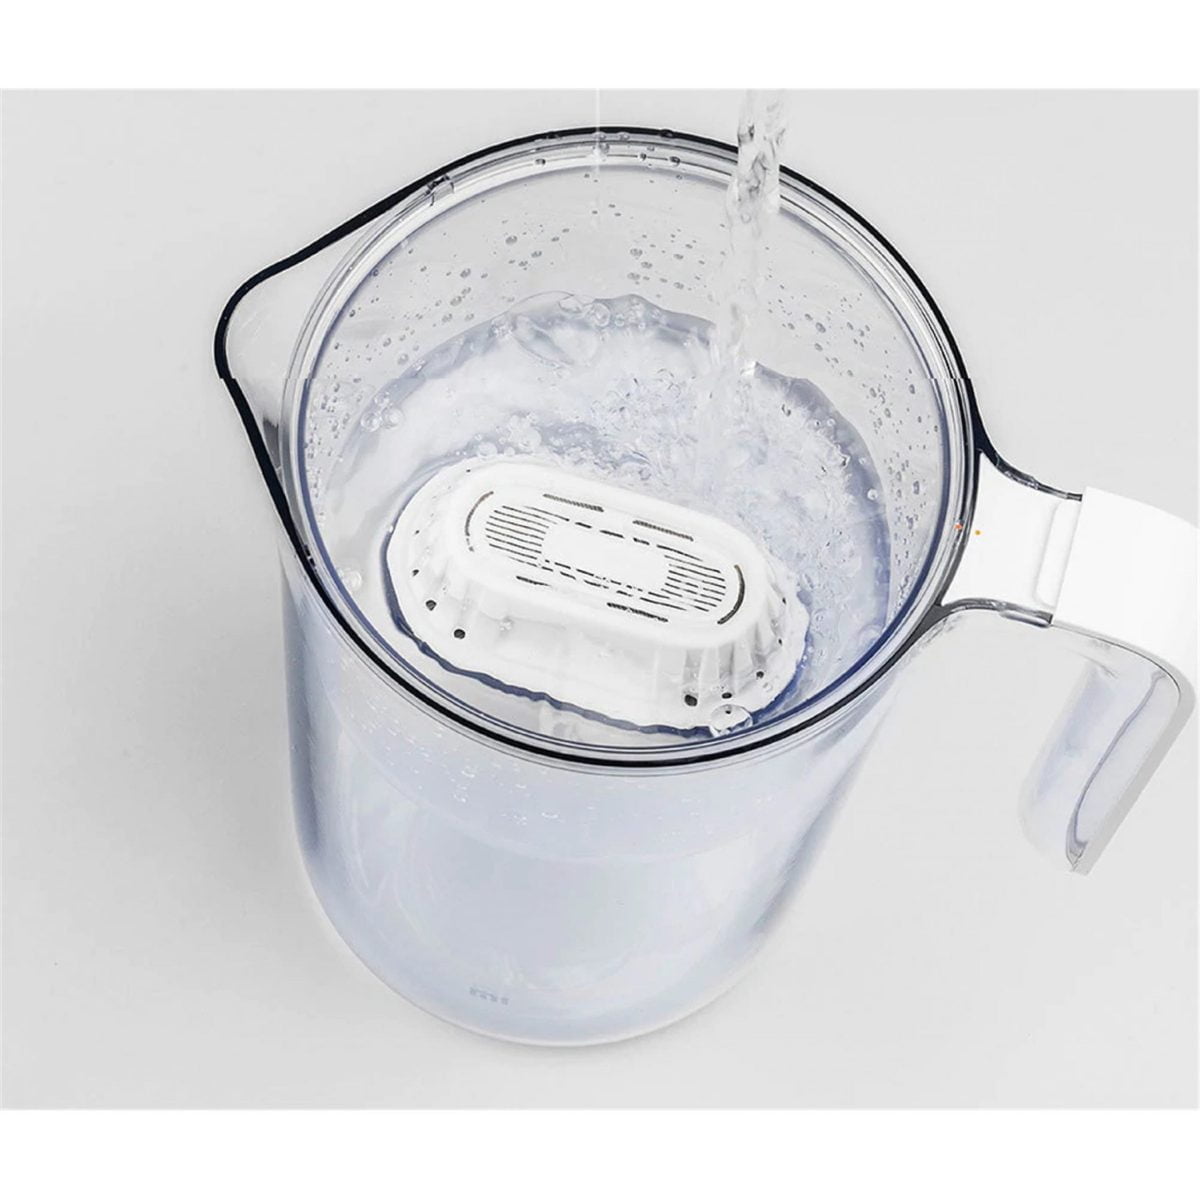 Water 01 Scaled Xiaomi Xiaomi Mi Home Water Filter Pitcher Easy To Remove The Lid, Funnel Open Design, Dust-Proof Spout &Nbsp; Xiaomi Xiaomi Mi Home Water Filter Pitcher